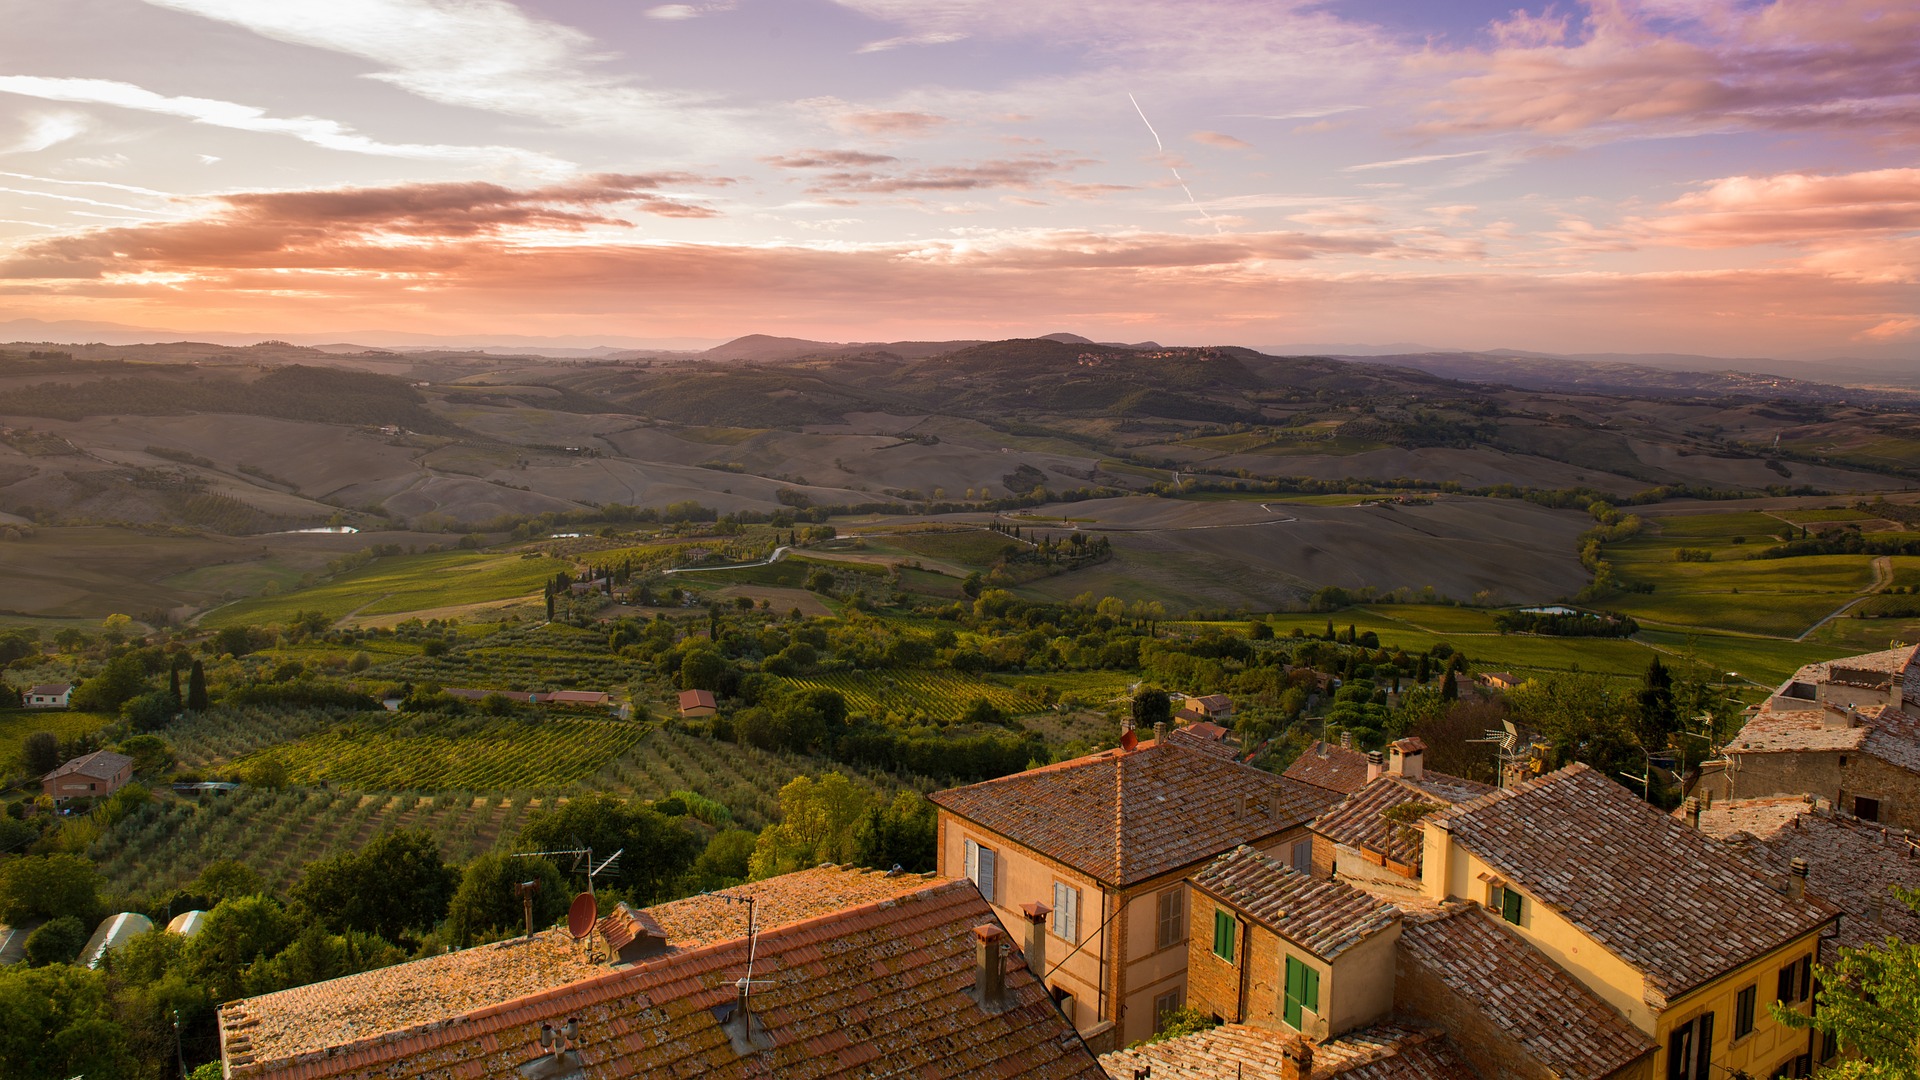 Tuscany Italy at sunset, overlooking a beautiful hillside with pink and purple sky, green trees grass, and buildings in the foreground